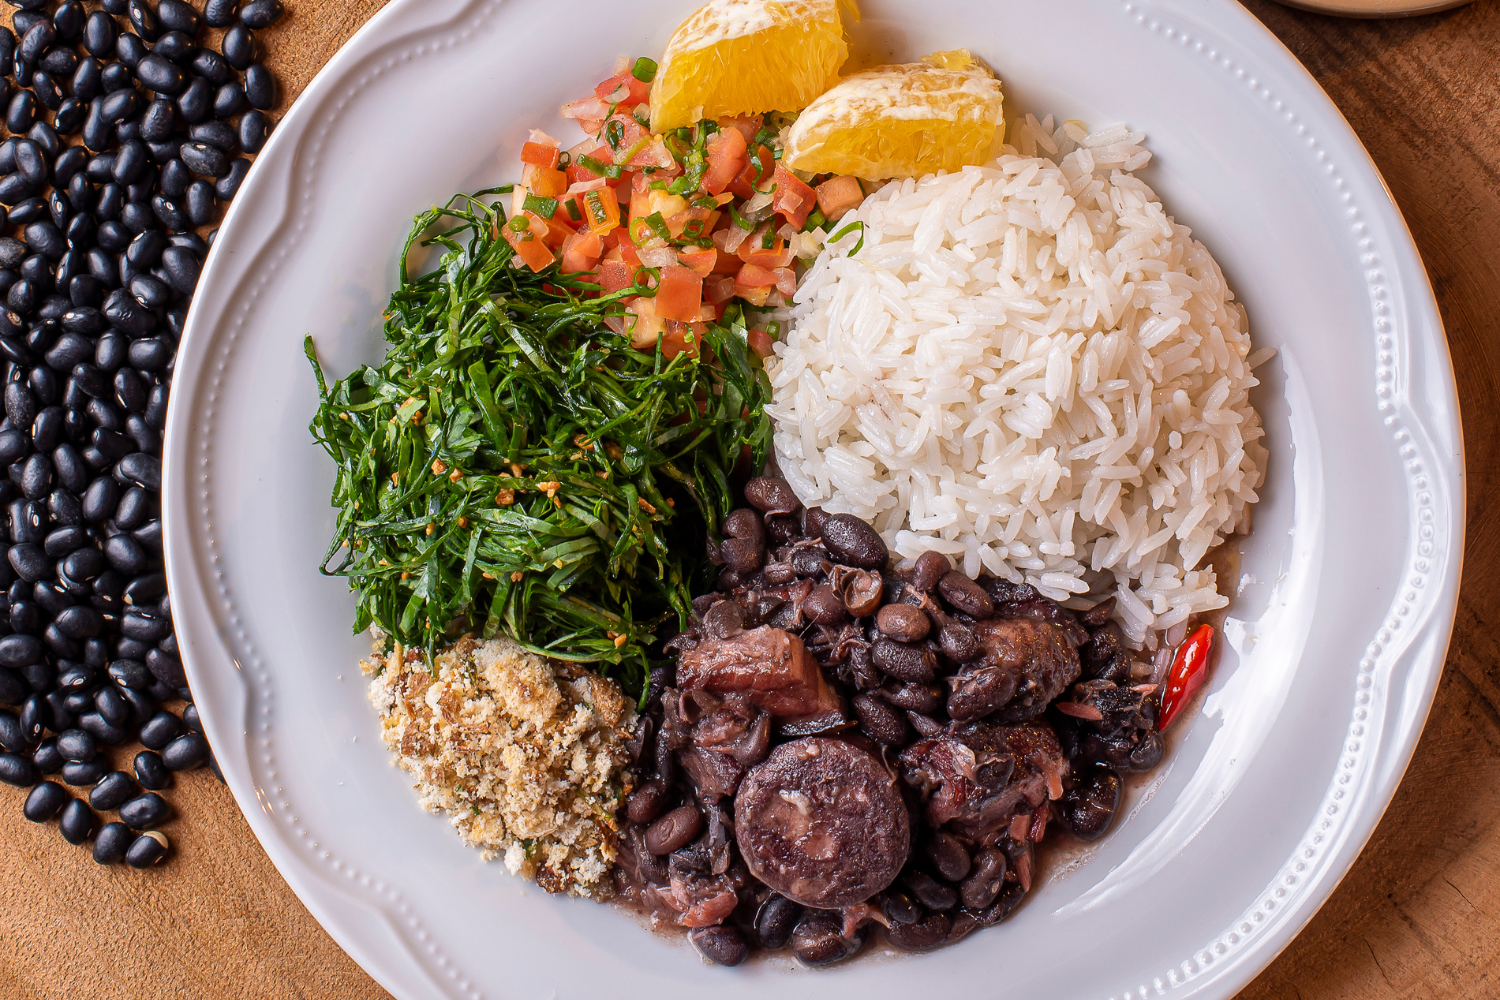 Brazilian Foods to Warm Up Your Winter: A Guide to Delicious Comfort